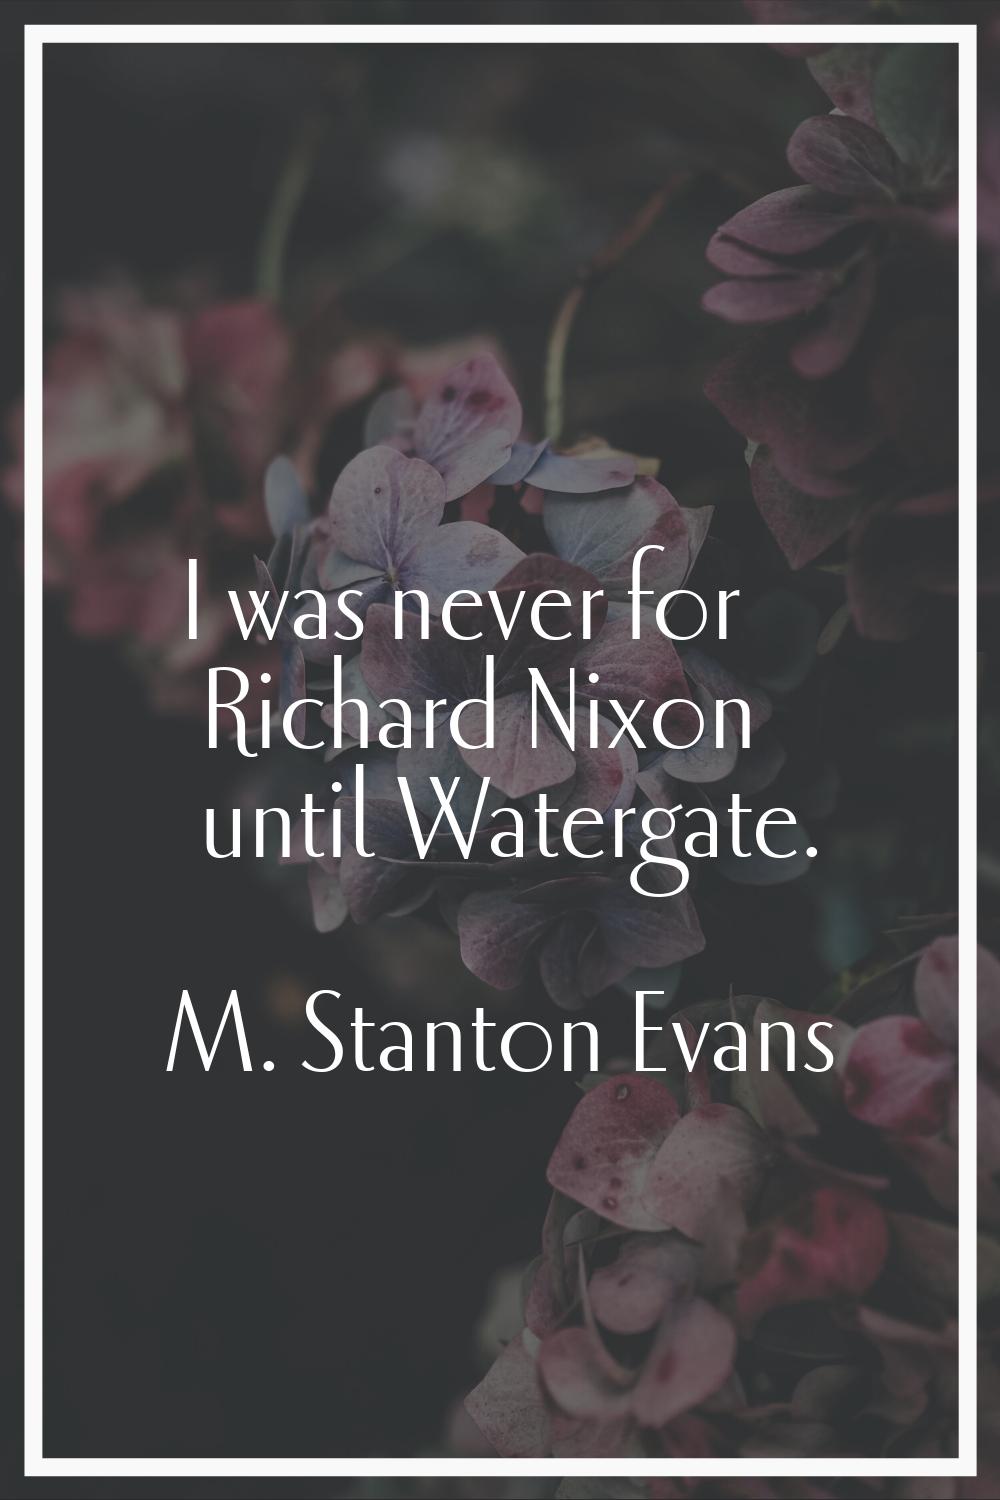 I was never for Richard Nixon until Watergate.